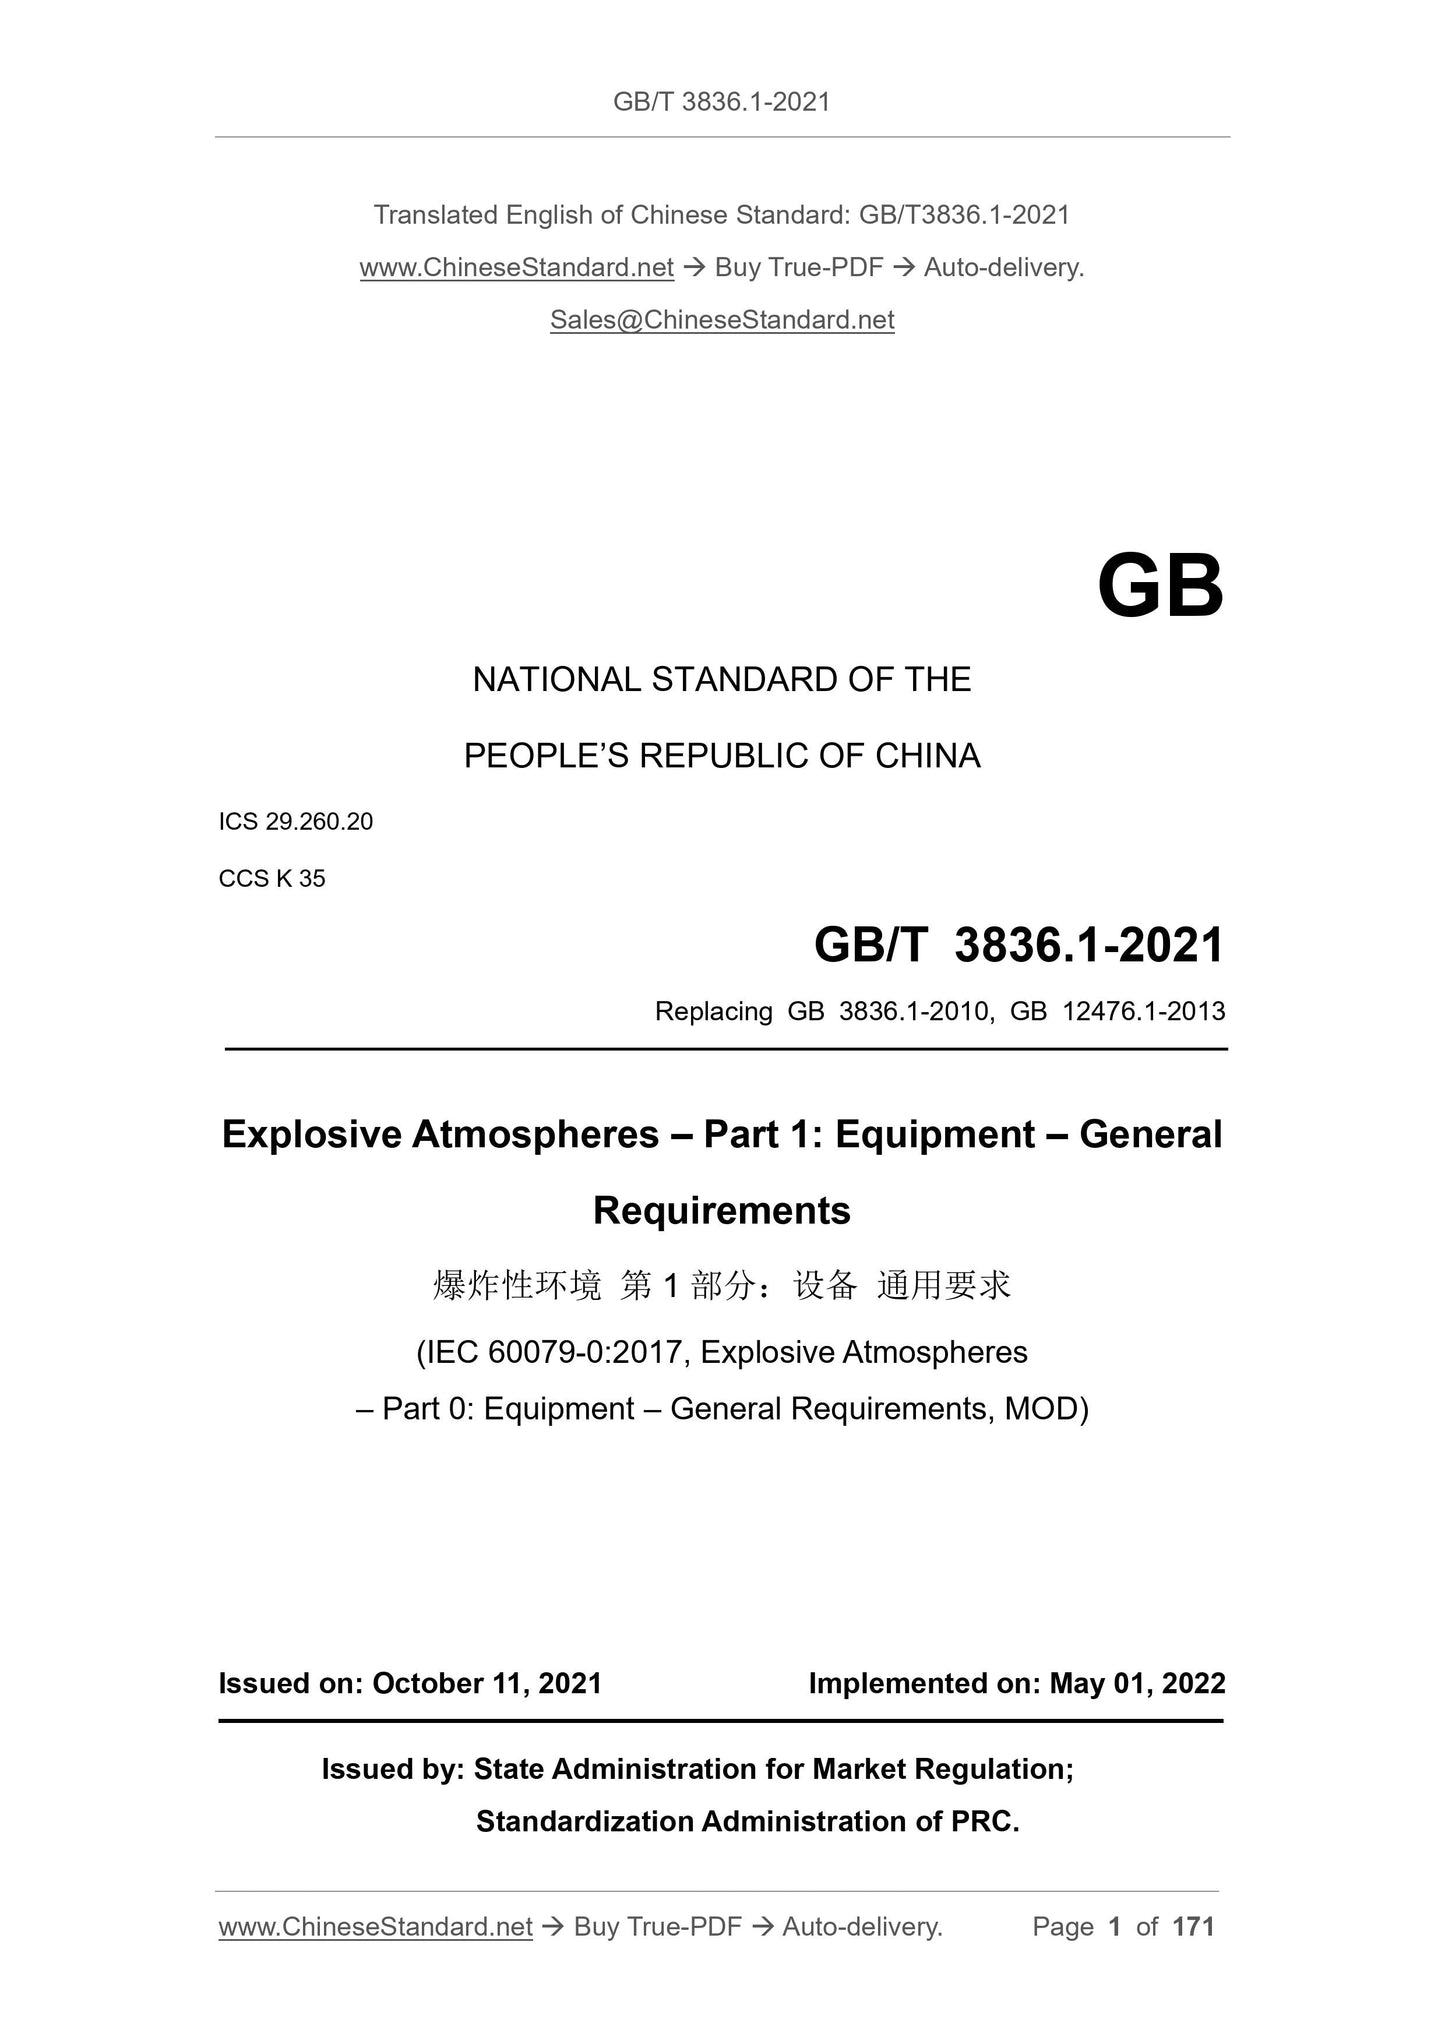 GB/T 3836.1-2021 Page 1